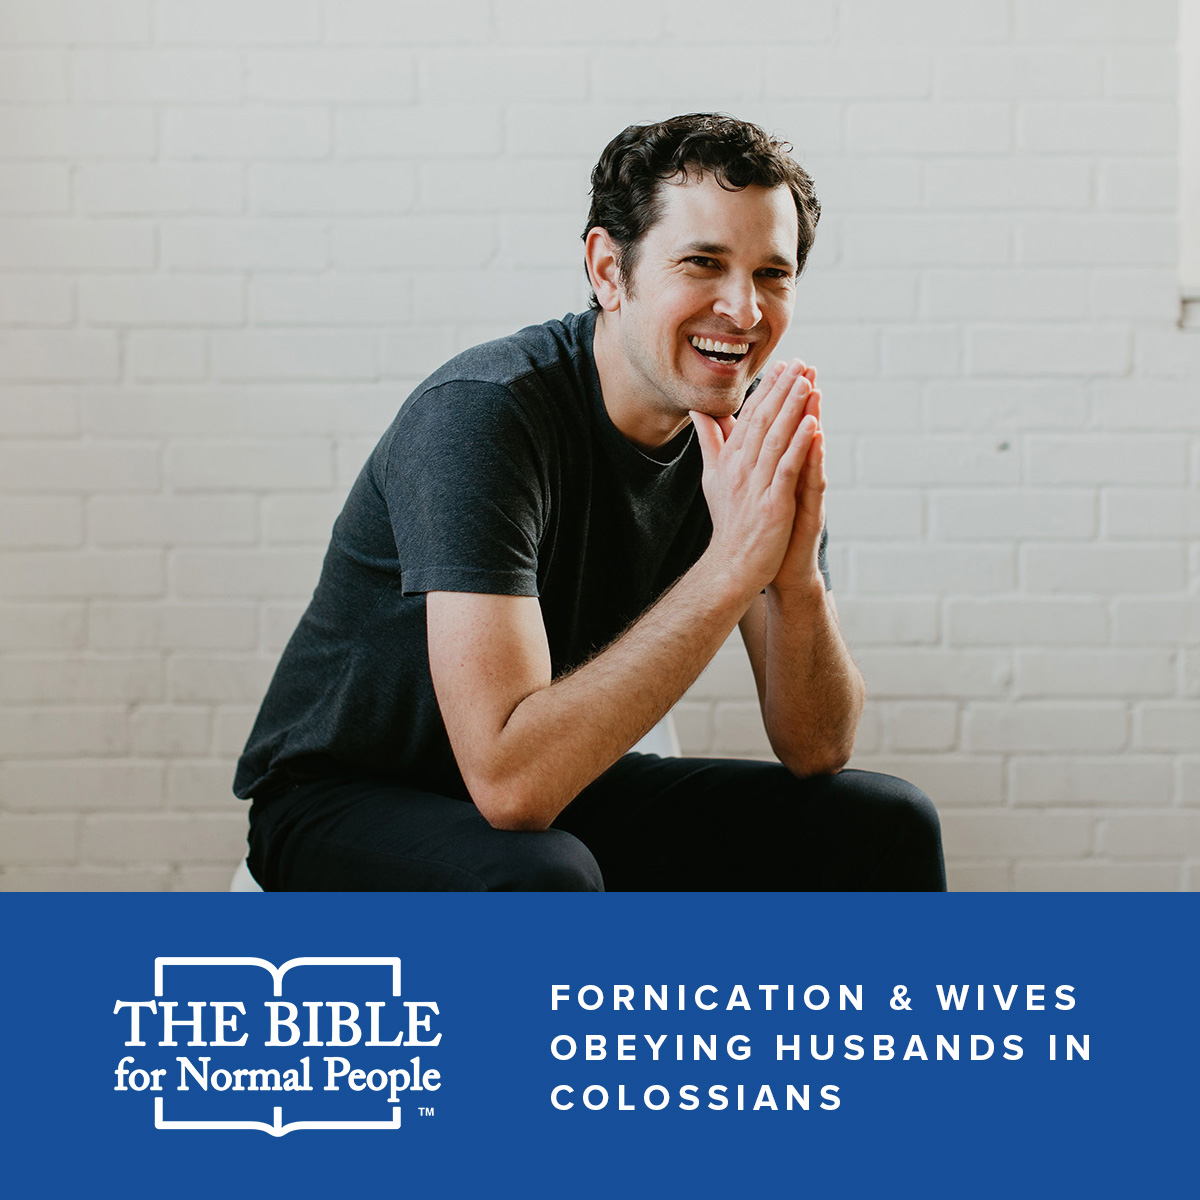 Paul is Frustrating: On Fornication & Wives Obeying Husbands in Colossians